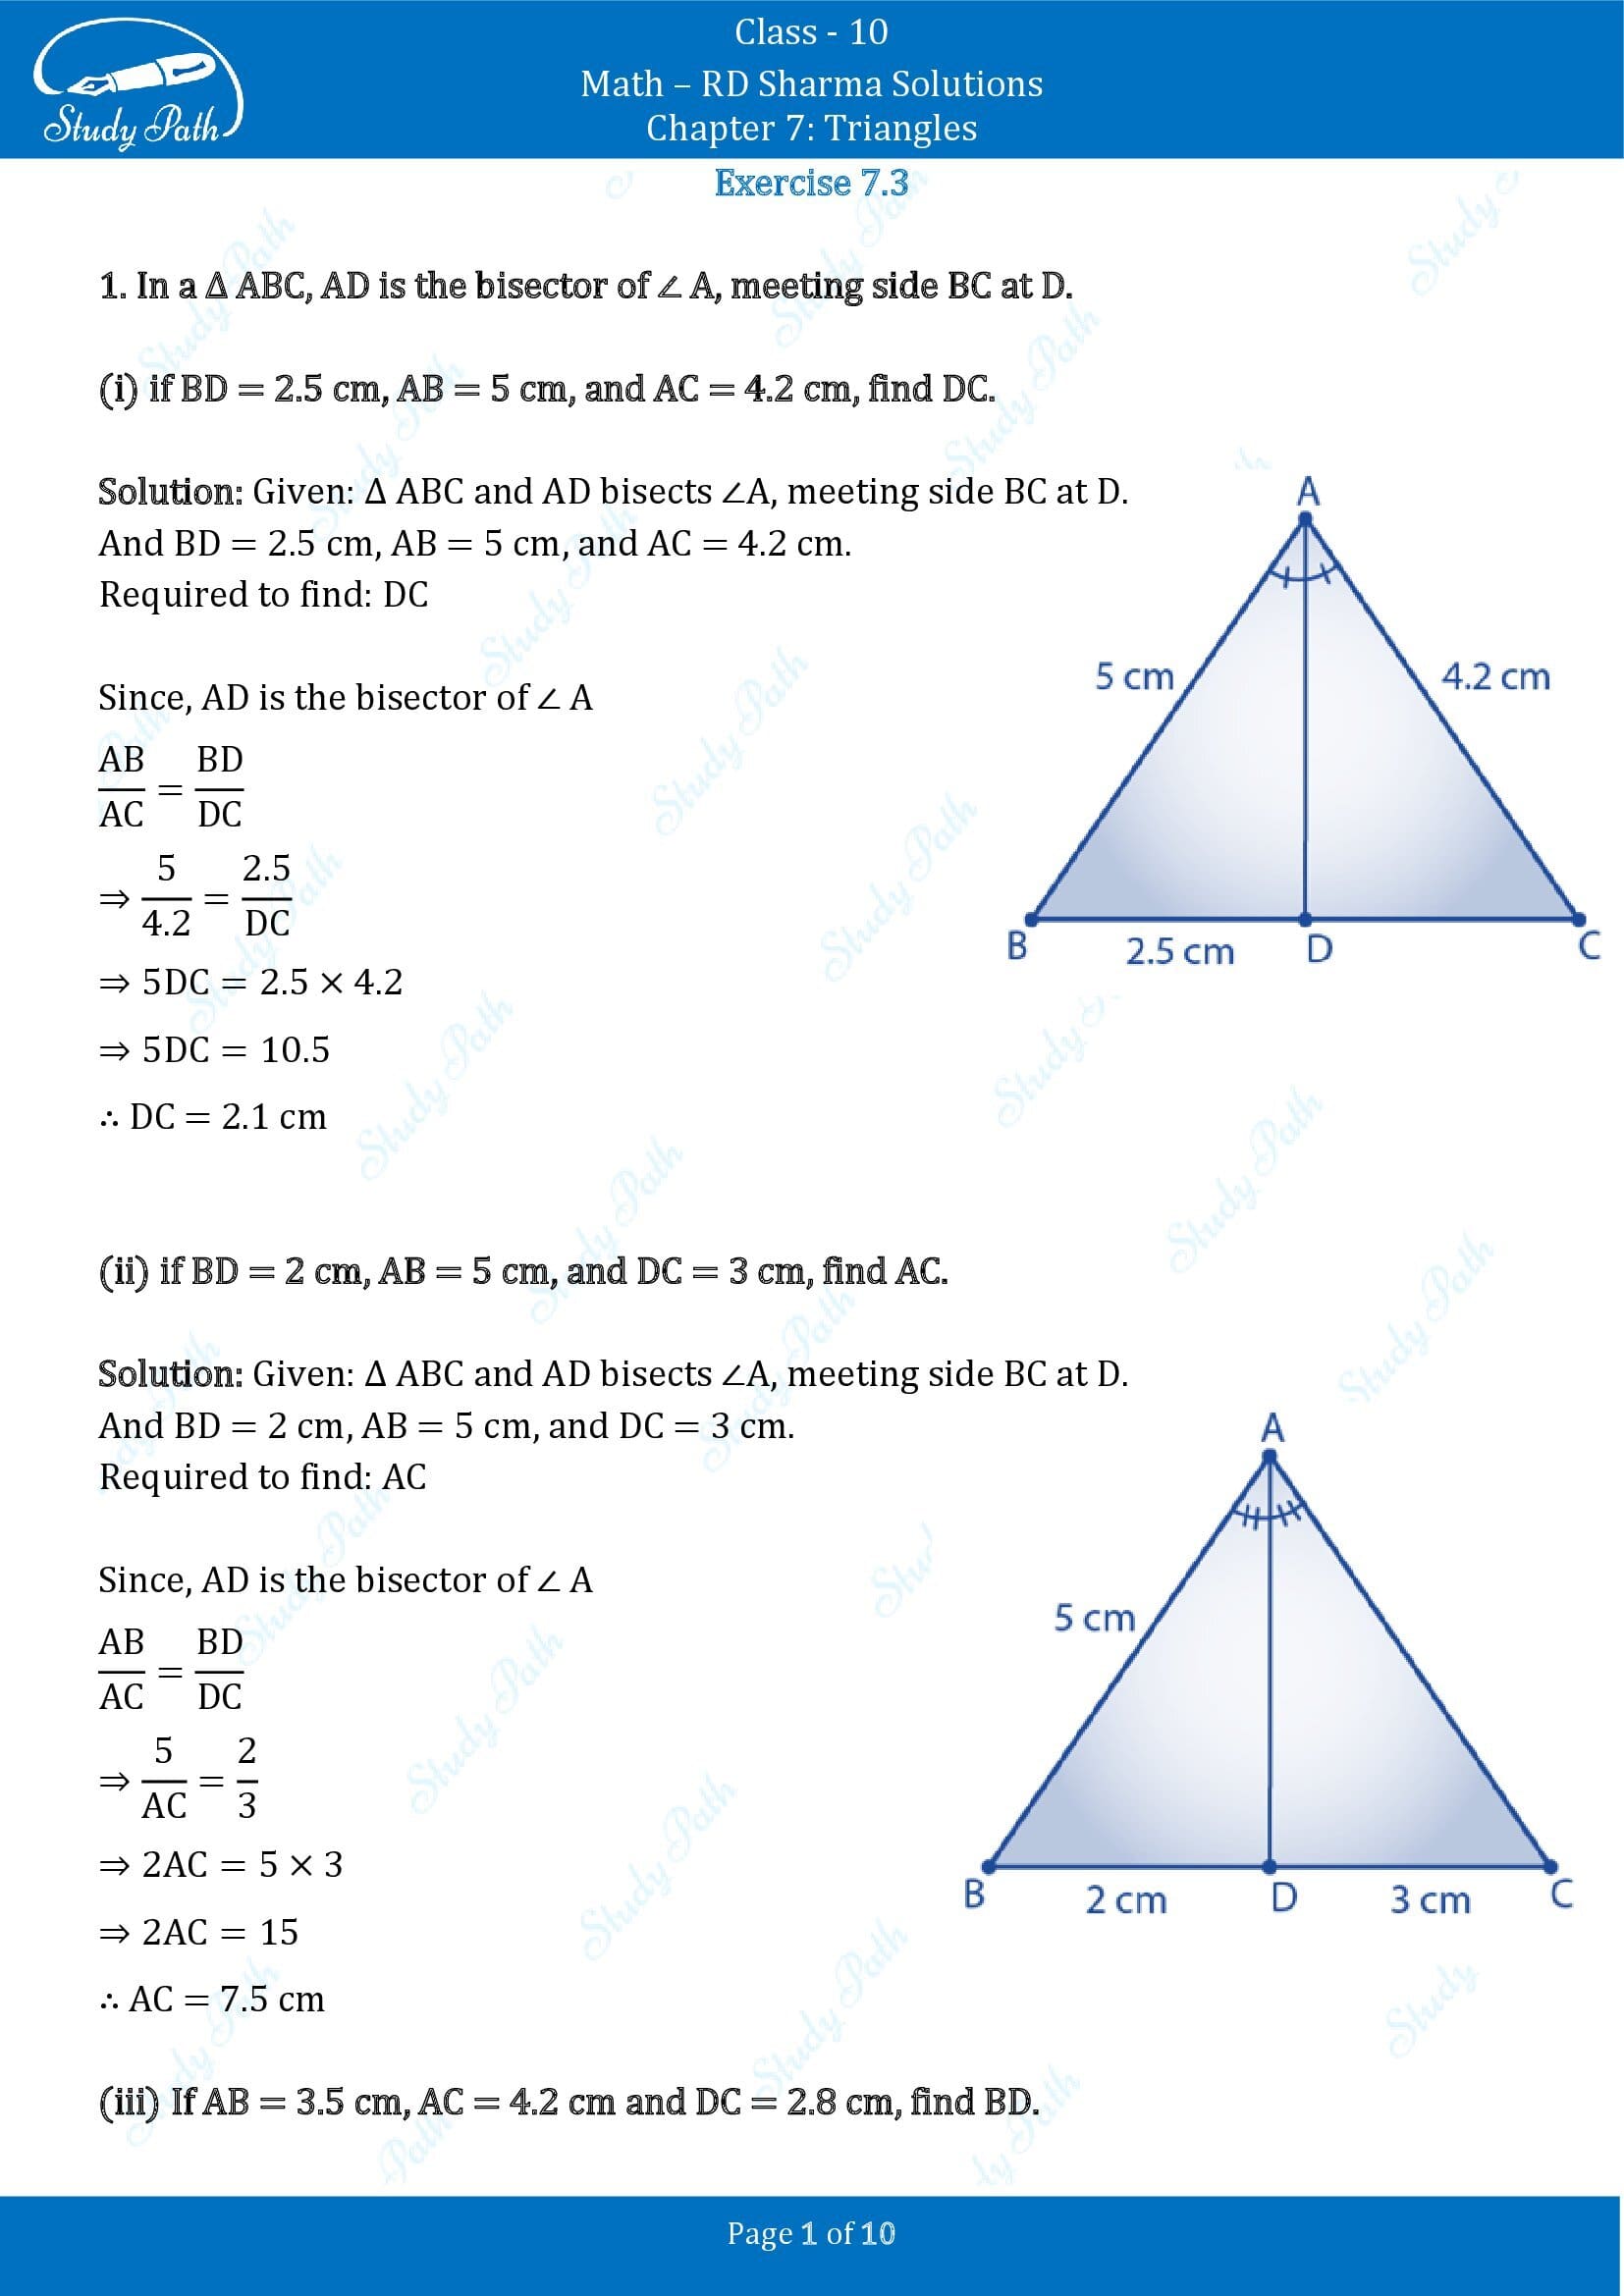 RD Sharma Solutions Class 10 Chapter 7 Triangles Exercise 7.3 00001